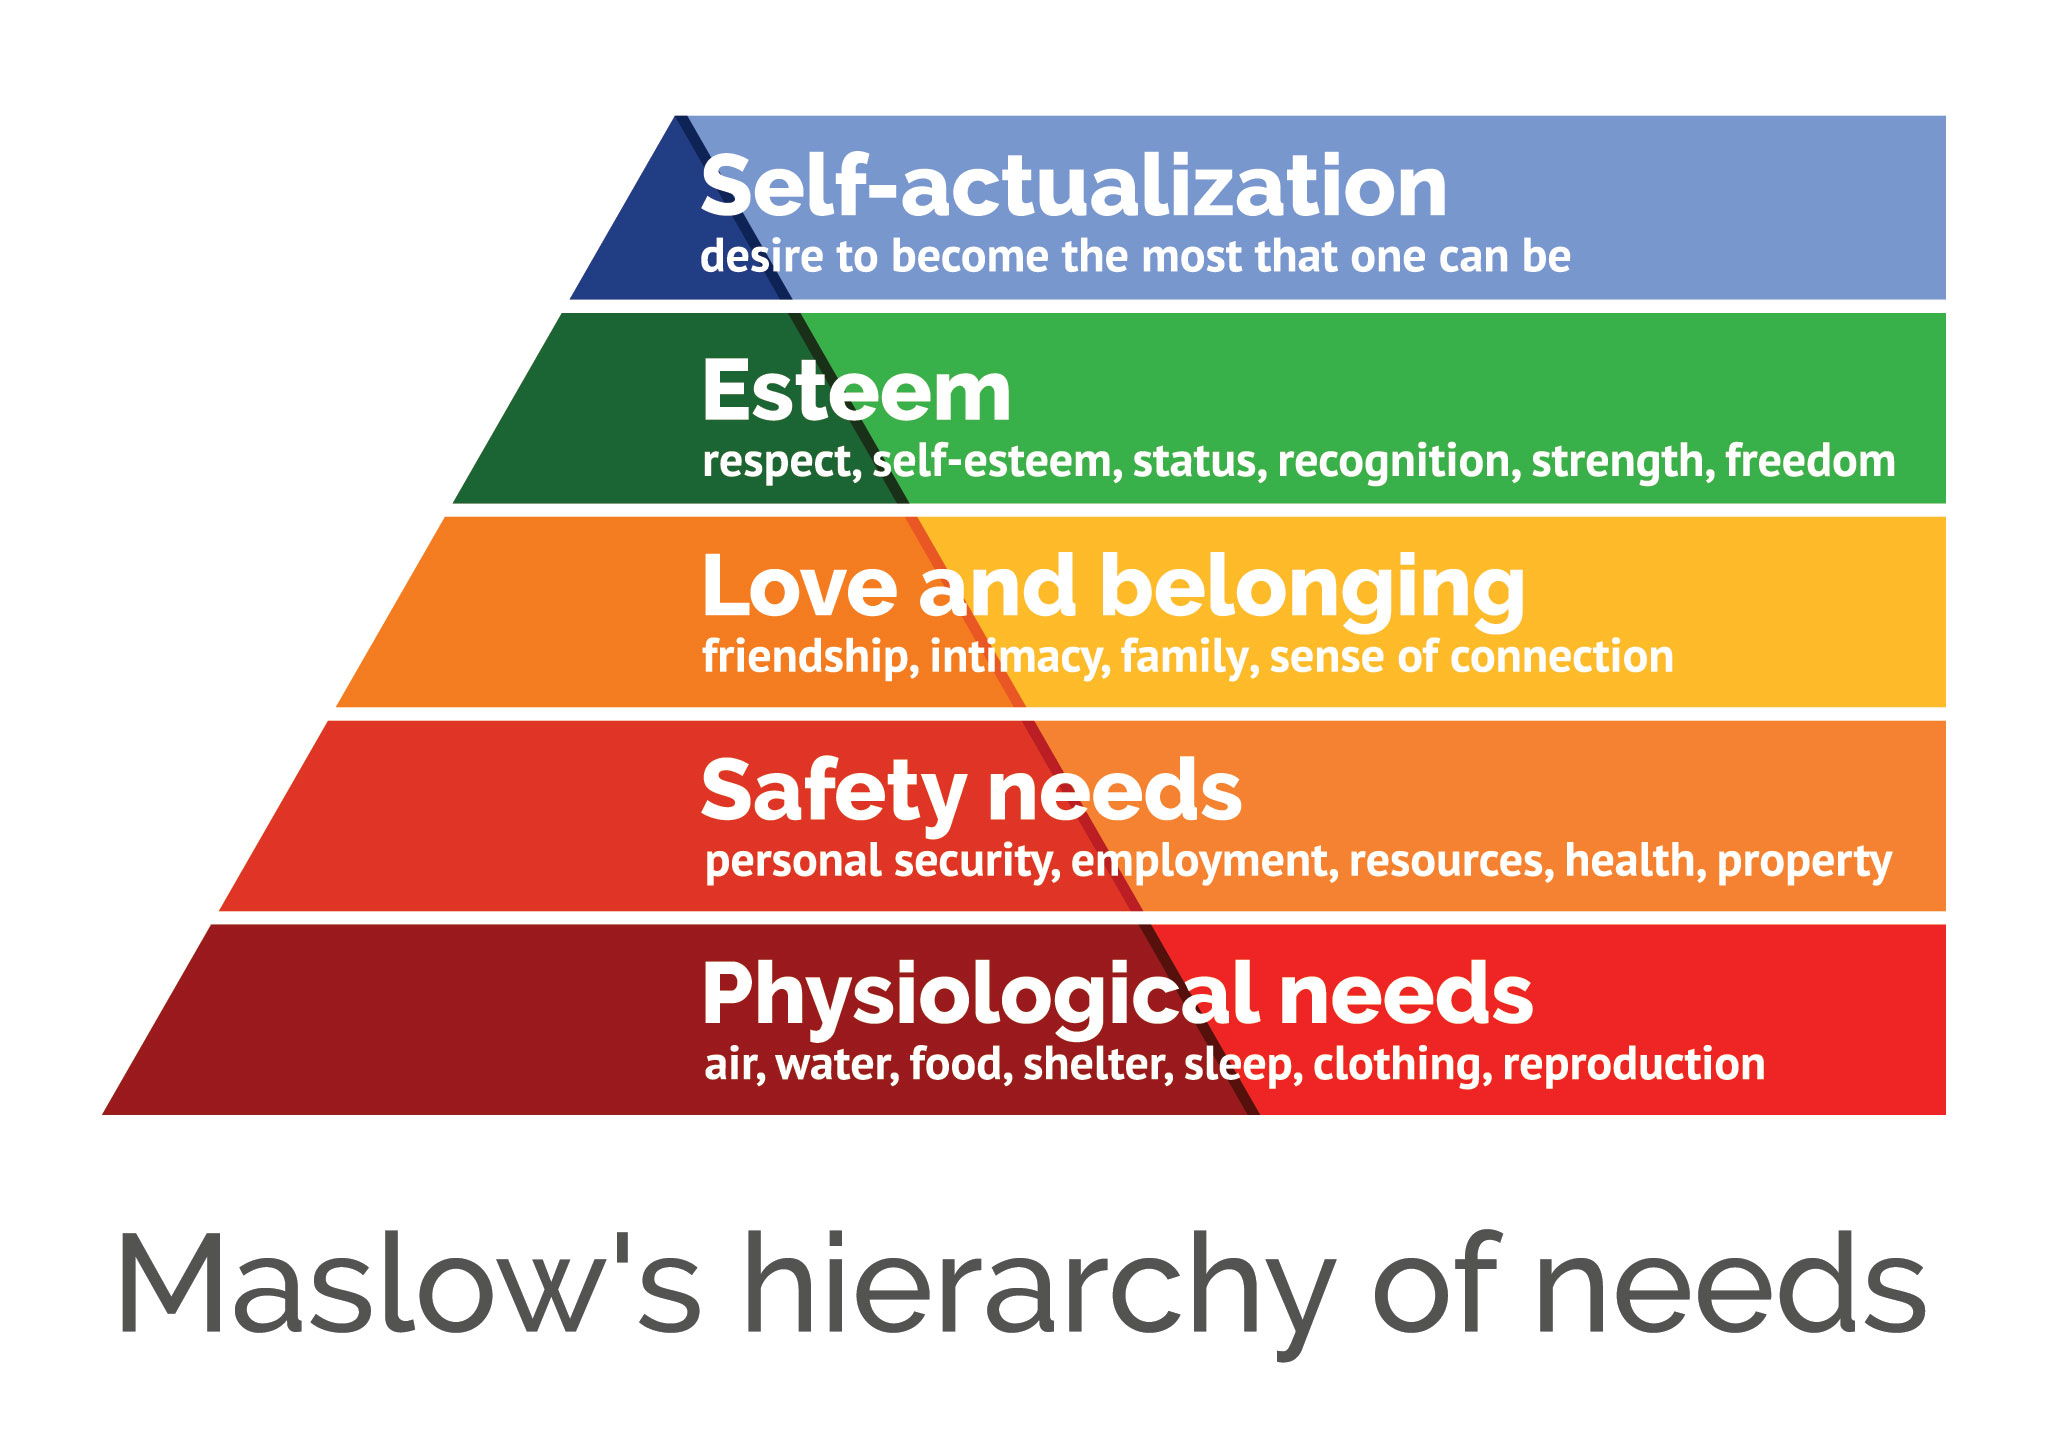 Maslow's hierarchy of needs, again